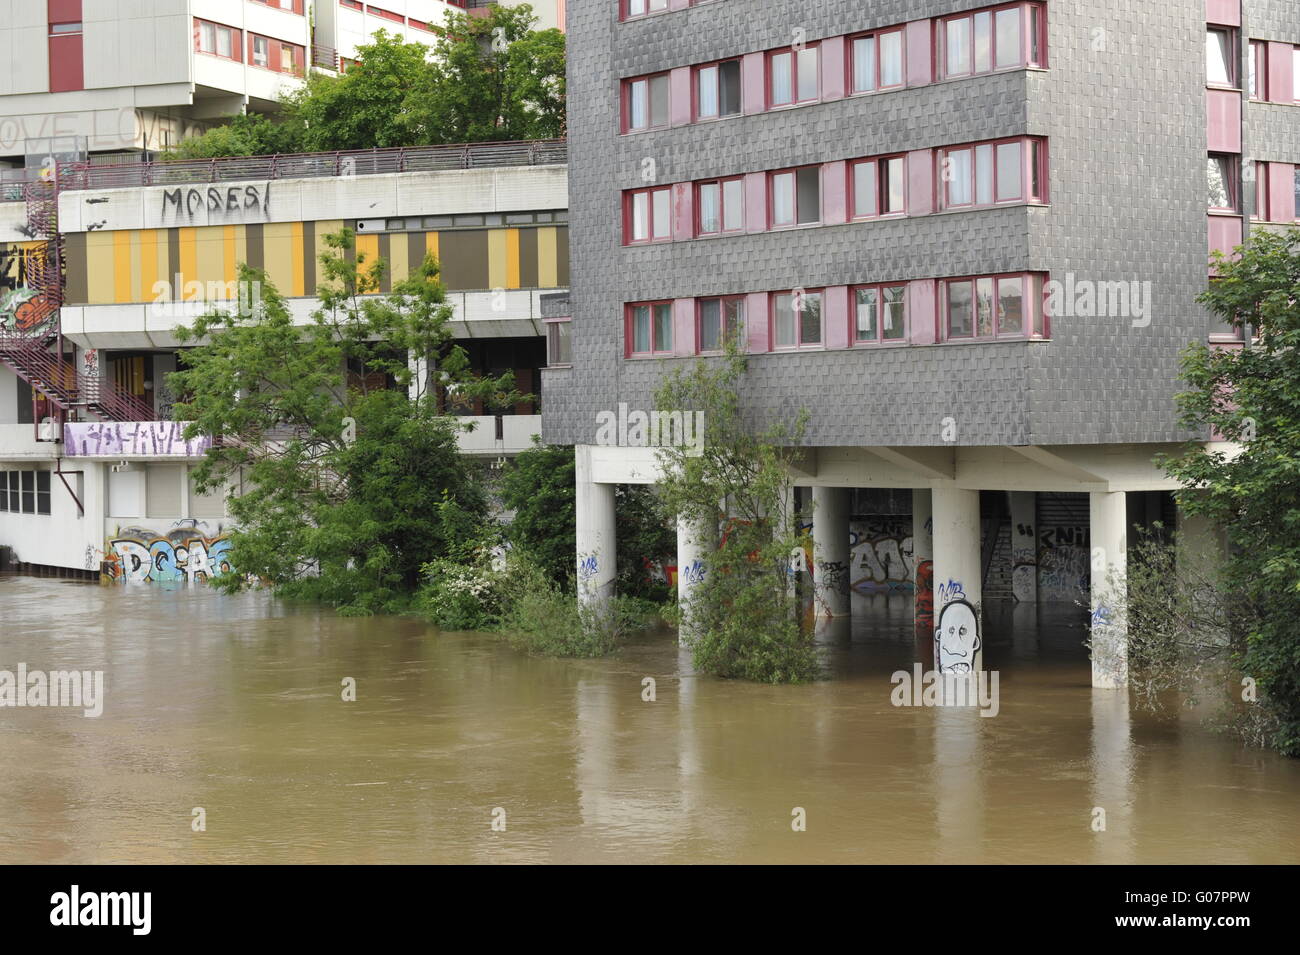 Natural disaster Floods in Hanover Stock Photo